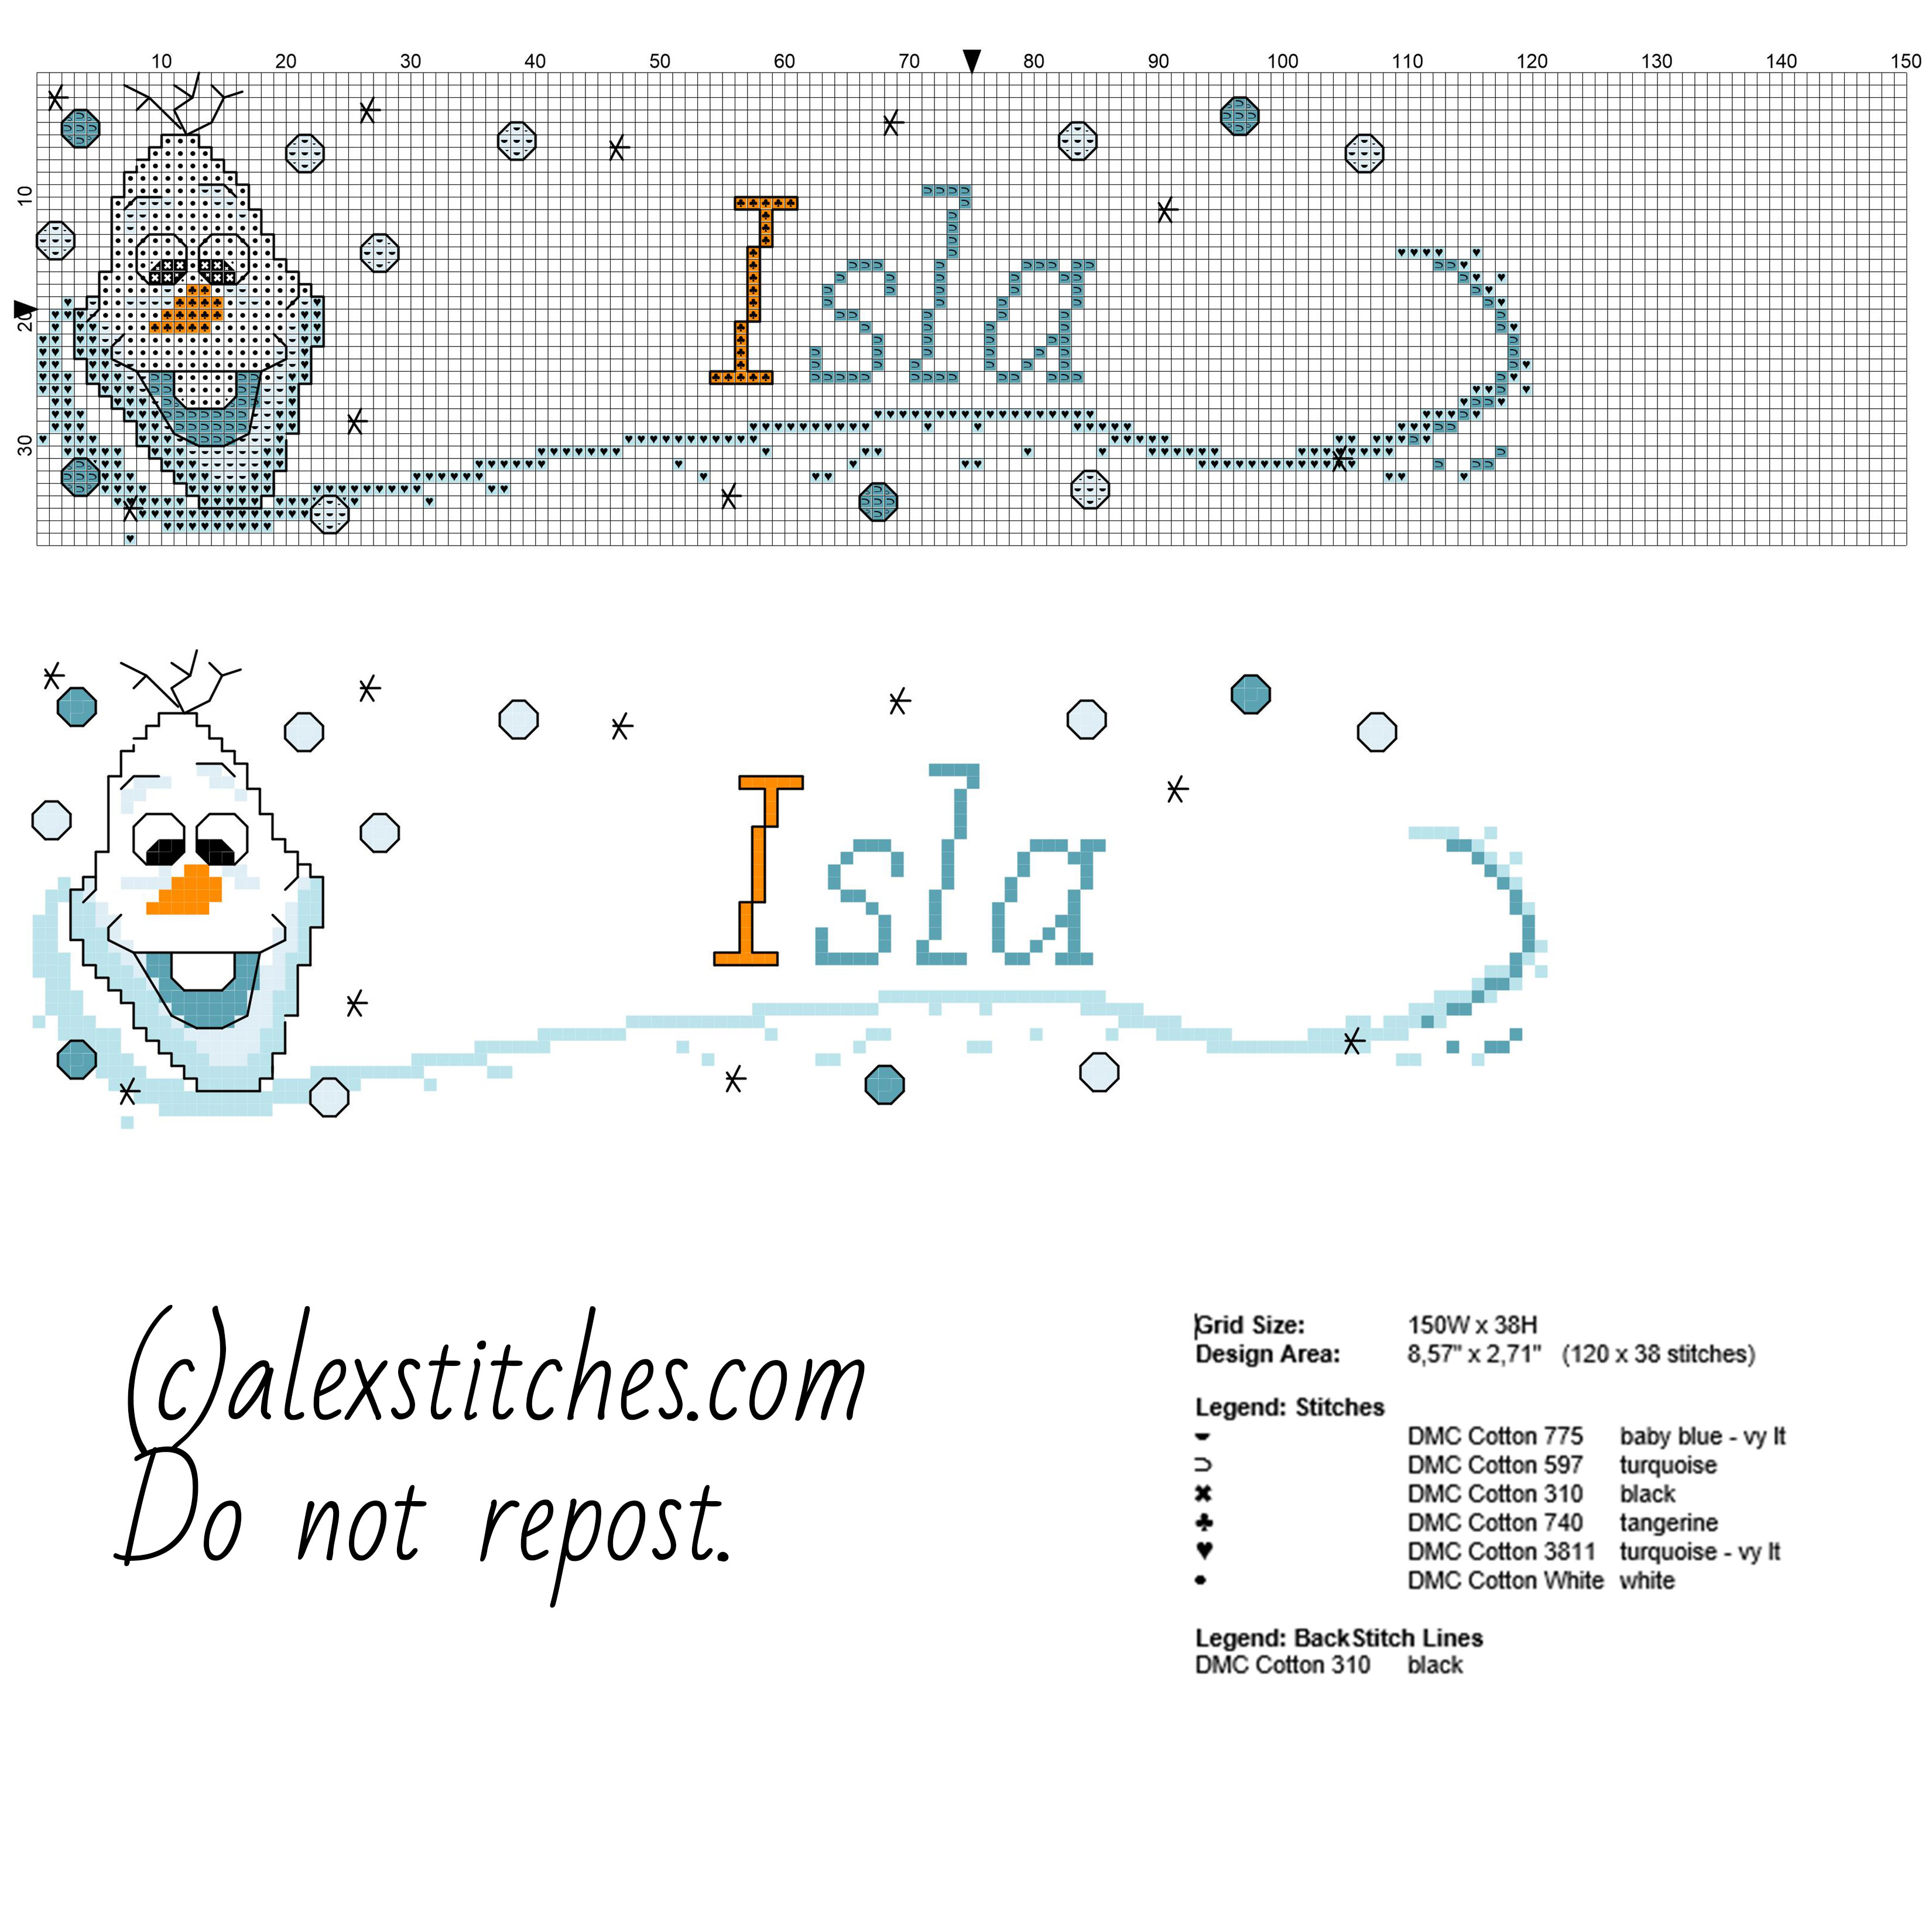 Cross stitch baby name Isla with Olaf character form Disney Frozen cartoon